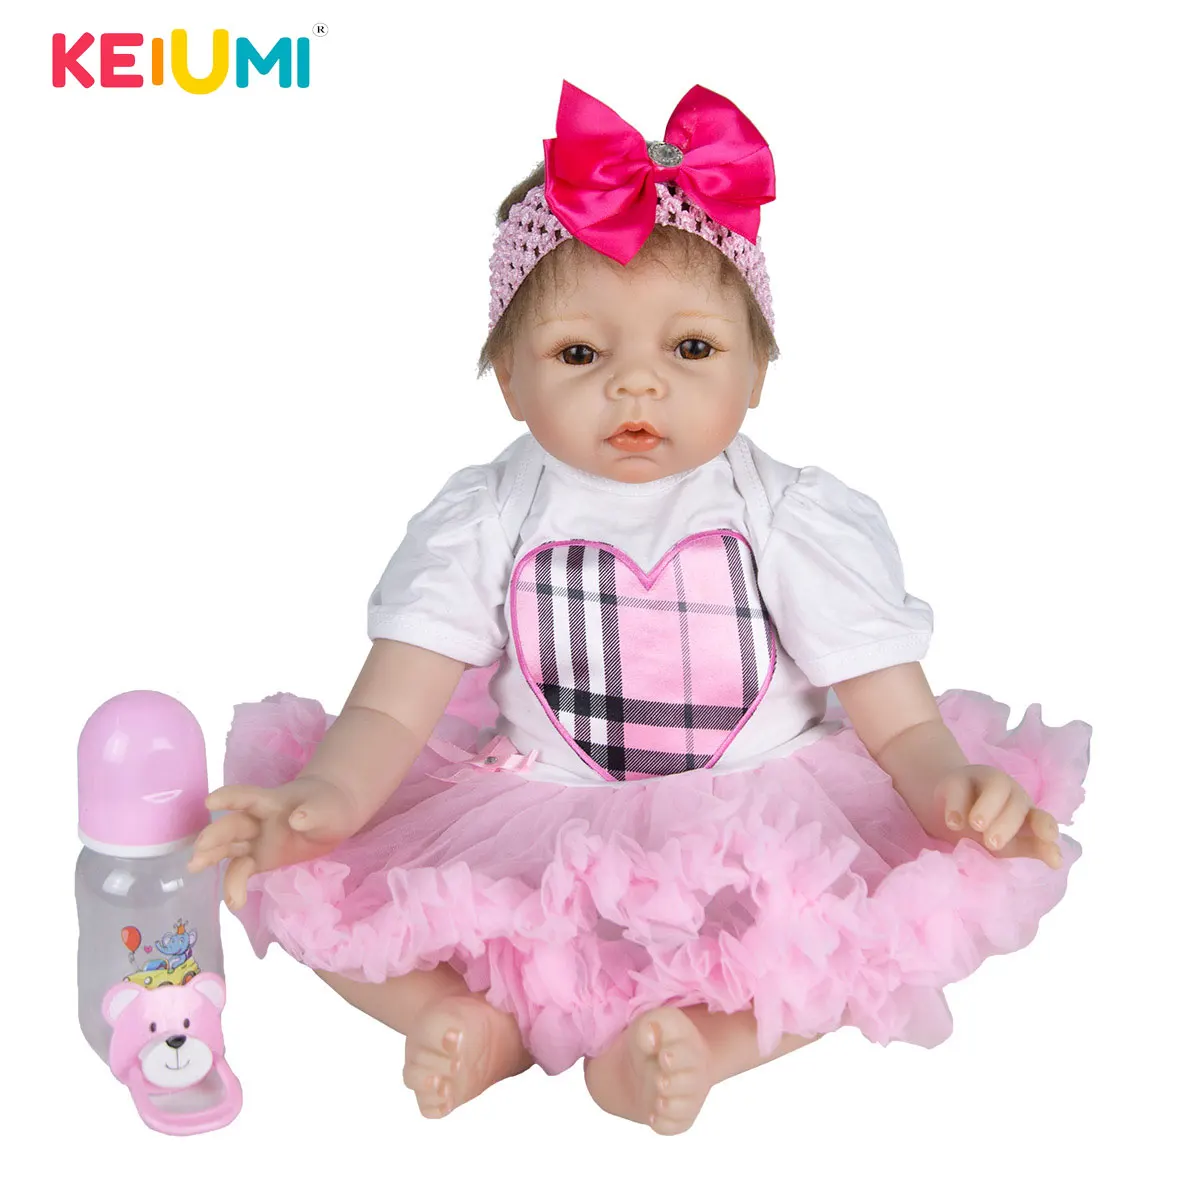 

KEIUMI 22 Inch Realistic Clearance Reborn Baby Silicone Soft Body Accessories Free Doll Birthday Gift Xmas Present